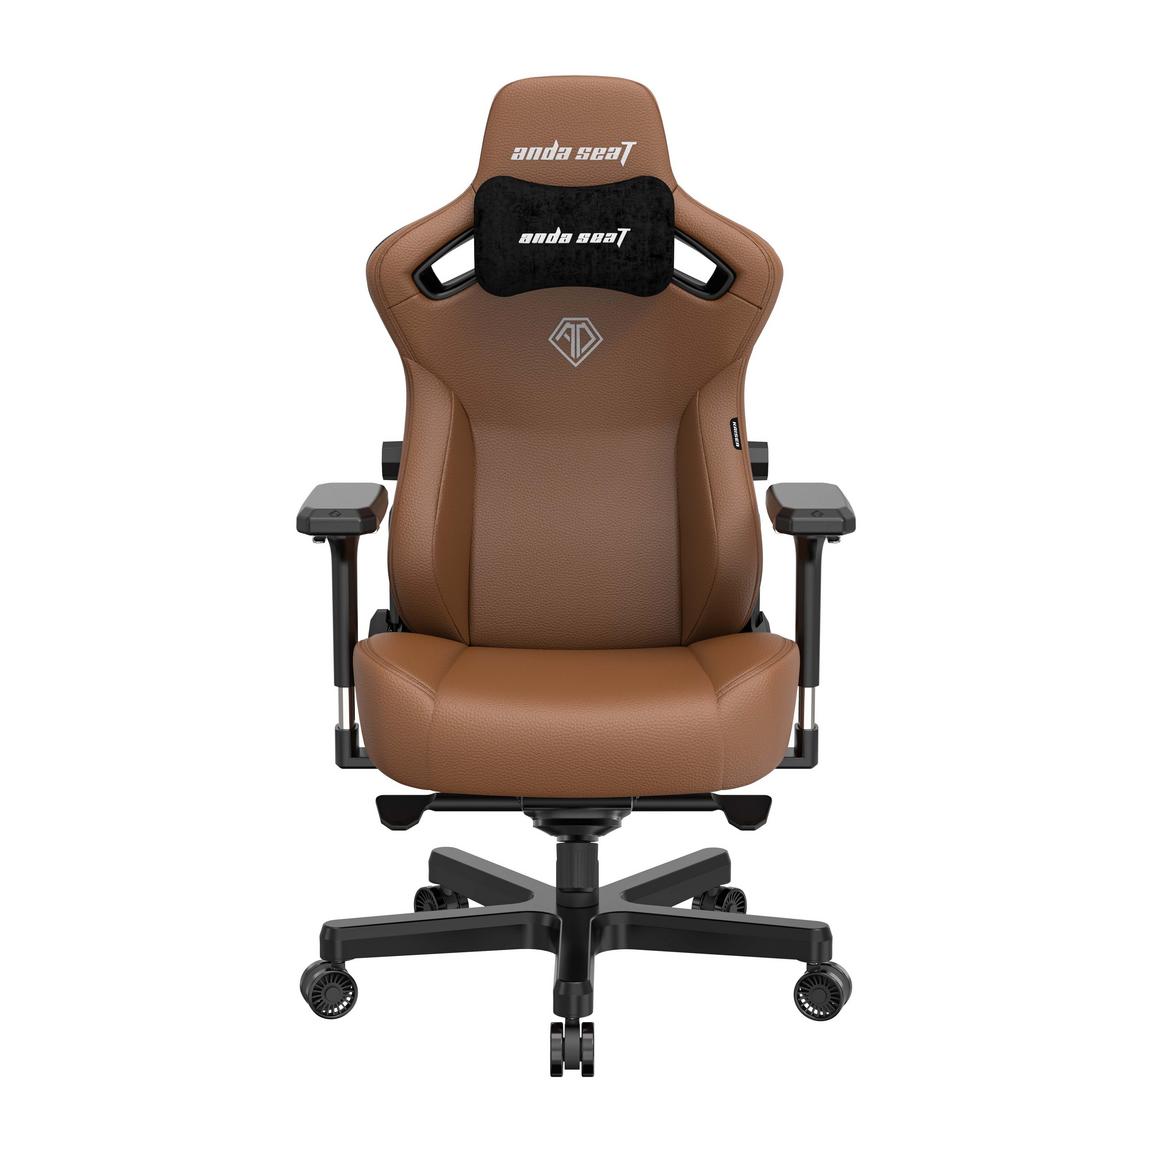 AndaSeat Kaiser 3 L Gaming Chair - Brown PVC Leather